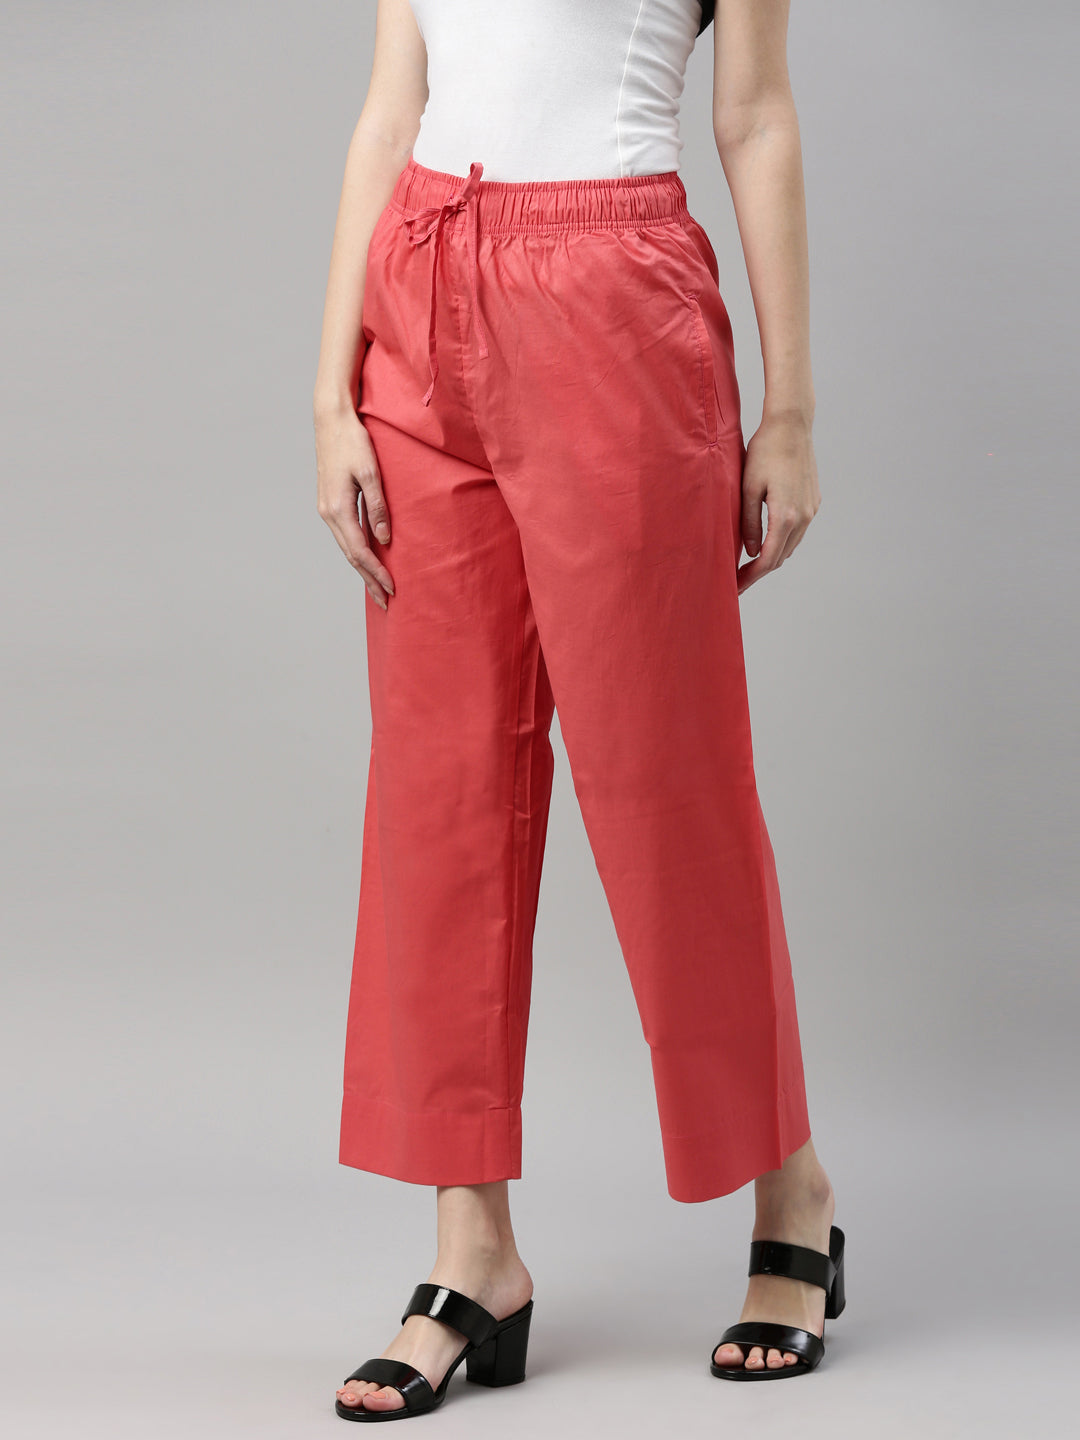 GO COLORS Shiny Pant XL (Dark Red) in Hyderabad at best price by Cks Pattu  Nilayam - Justdial